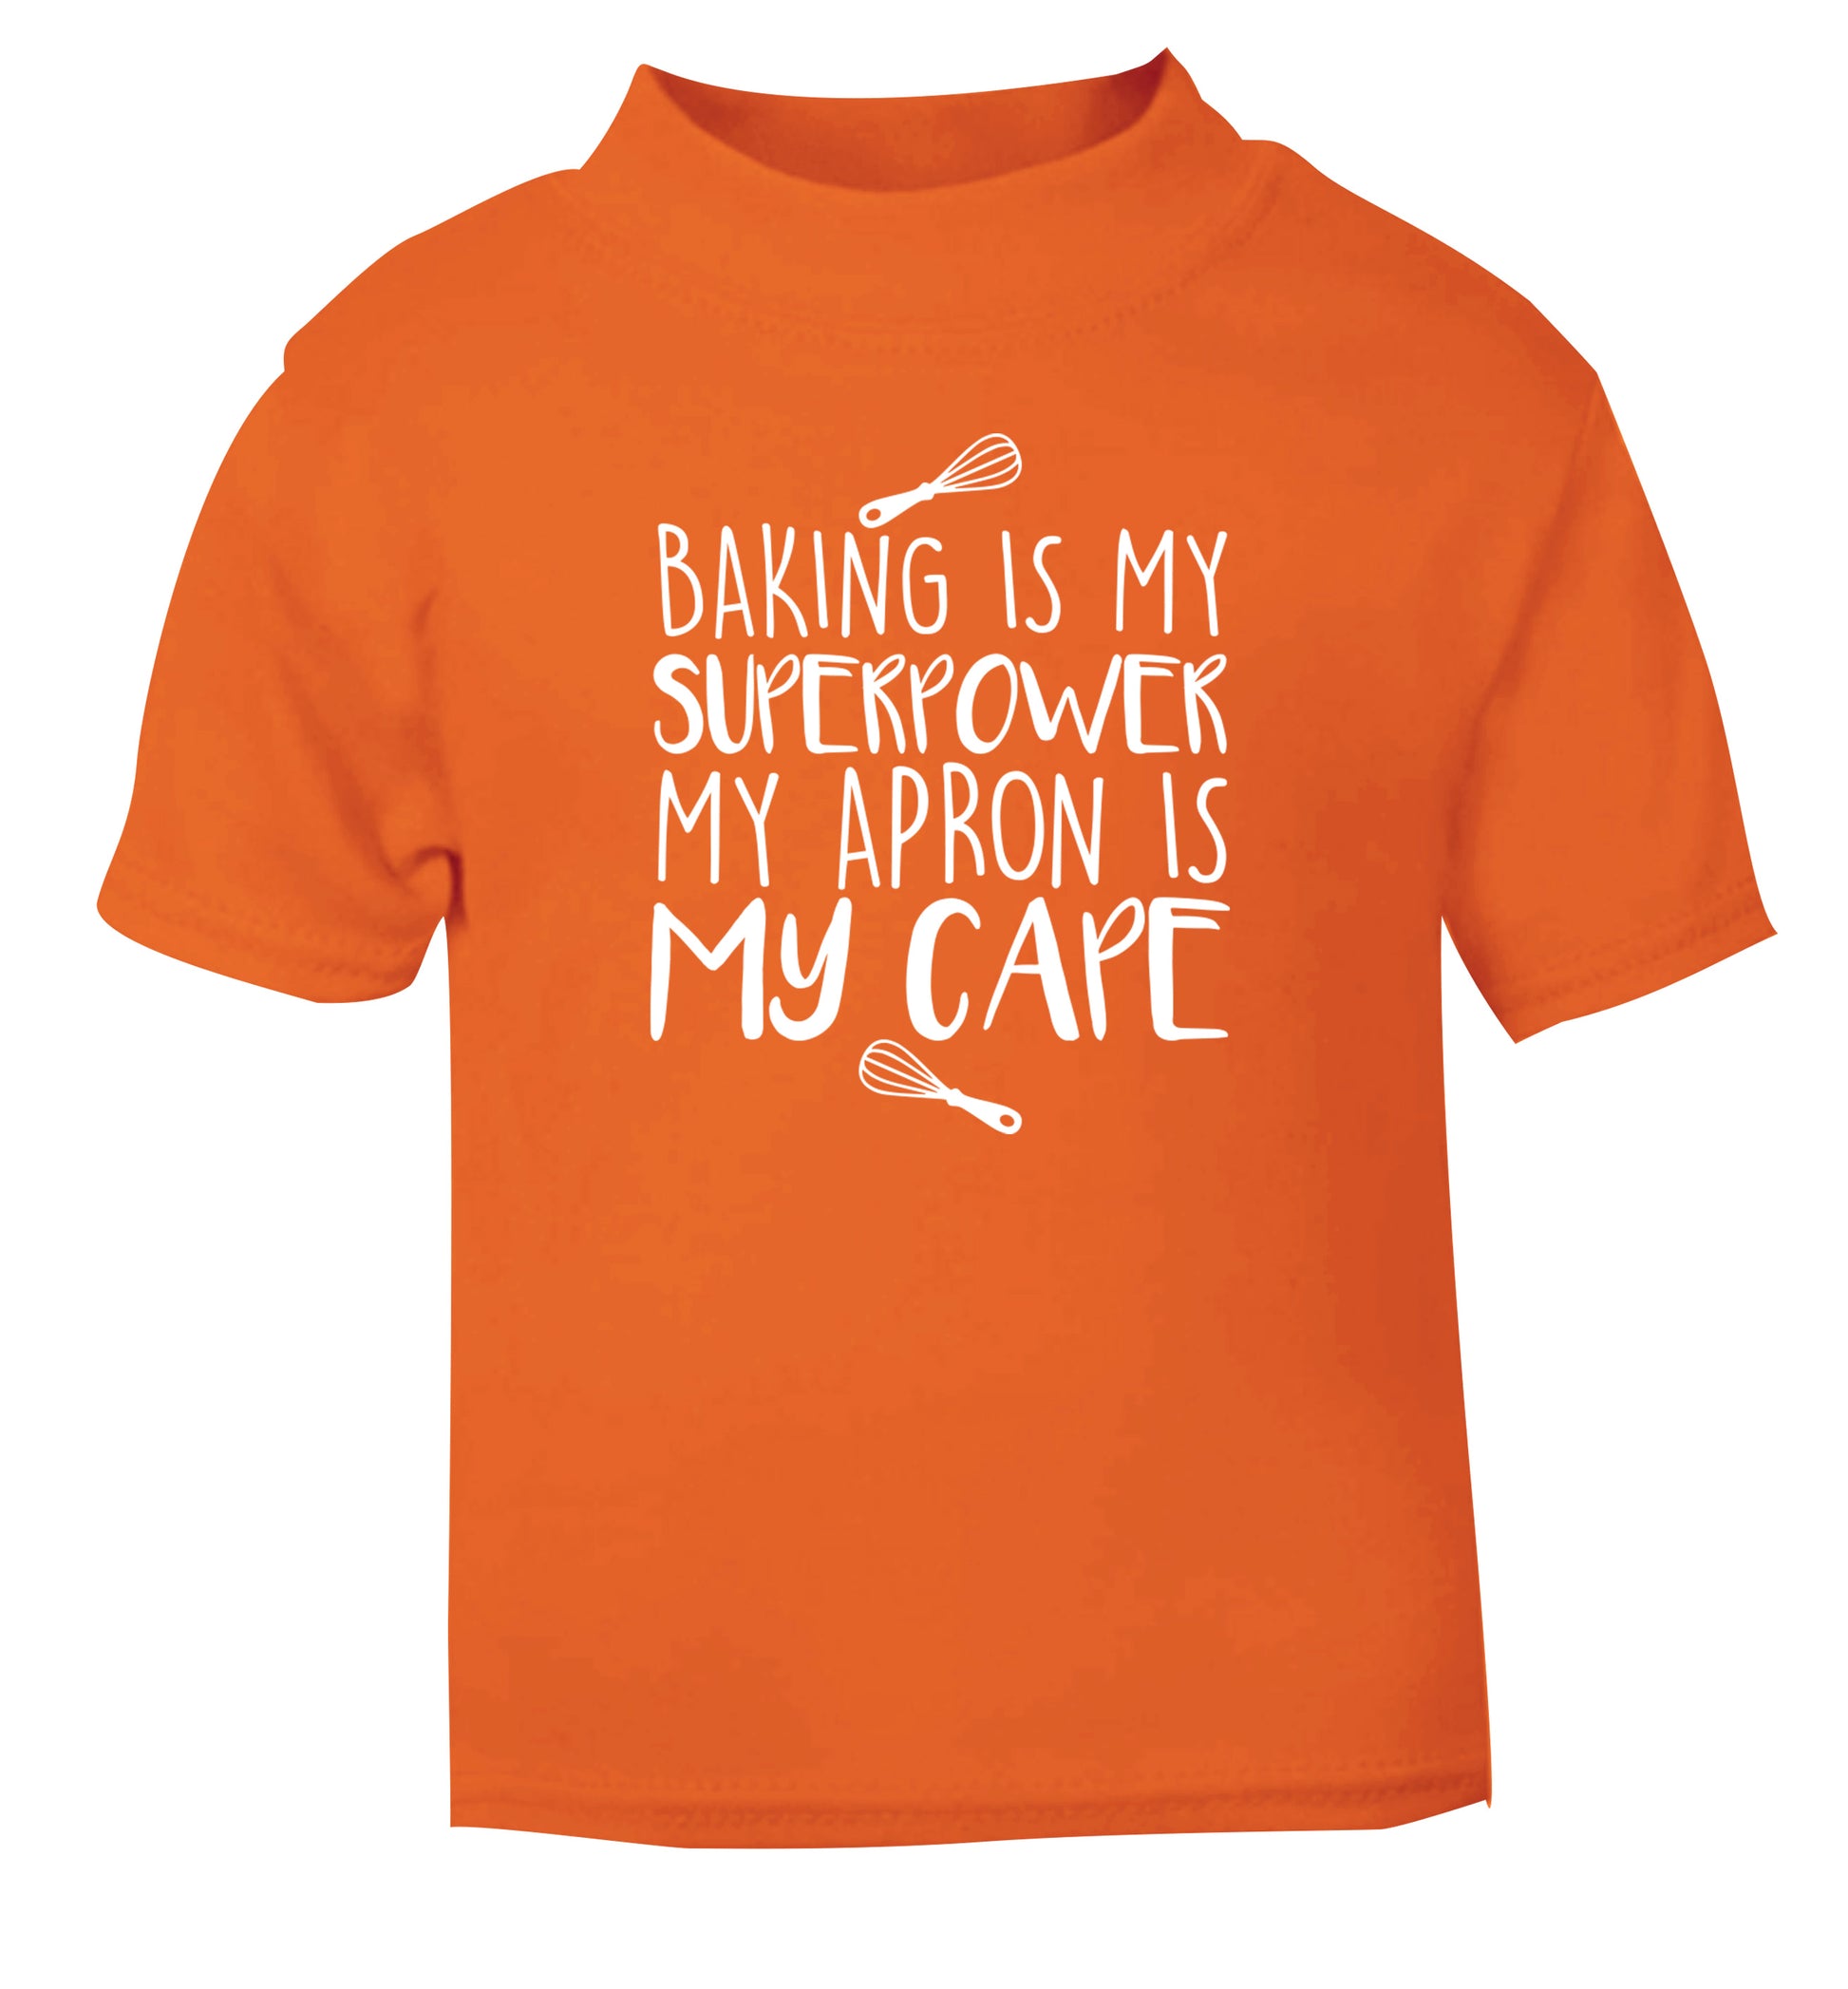 Baking is my superpower my apron is my cape orange Baby Toddler Tshirt 2 Years